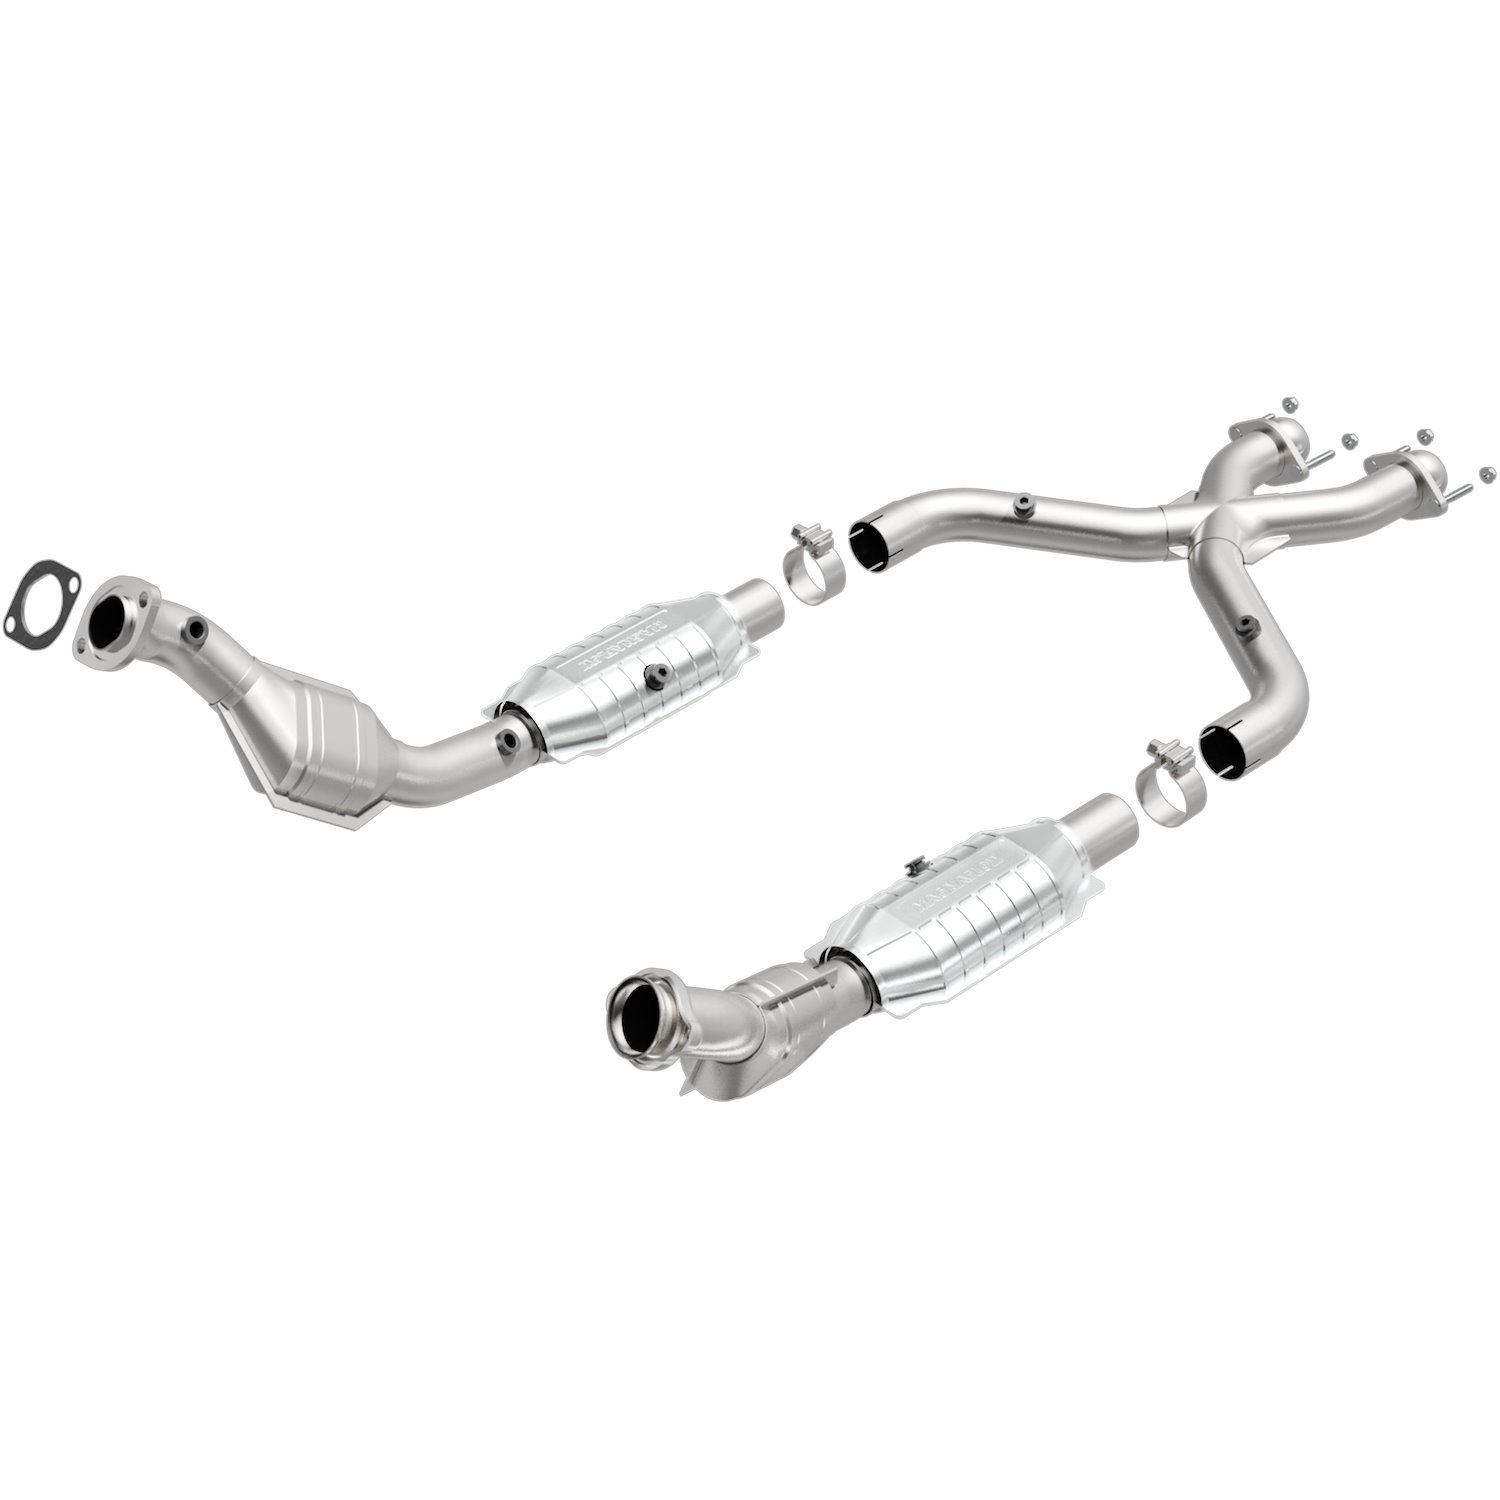 1999-2004 Ford Mustang HM Grade Federal / EPA Compliant Direct-Fit Catalytic Converter